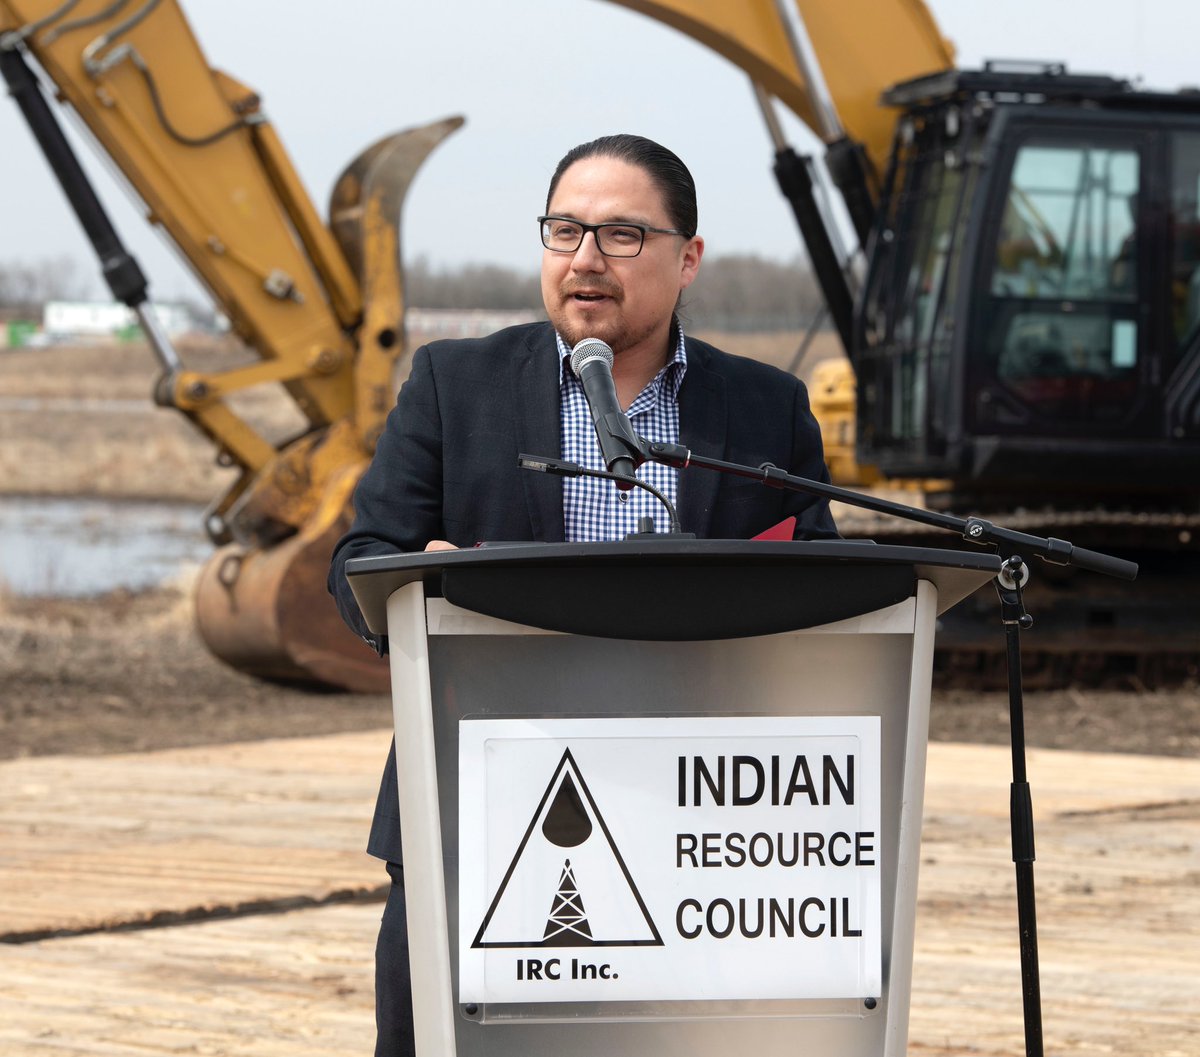 Joined the @IRCCanada at the Enoch Cree First Nation to celebrate the success of our Site Reclamation Program that has helped clean up 1300 abandoned oil wells on Reserves, while creating hundreds of good jobs for indigenous people.